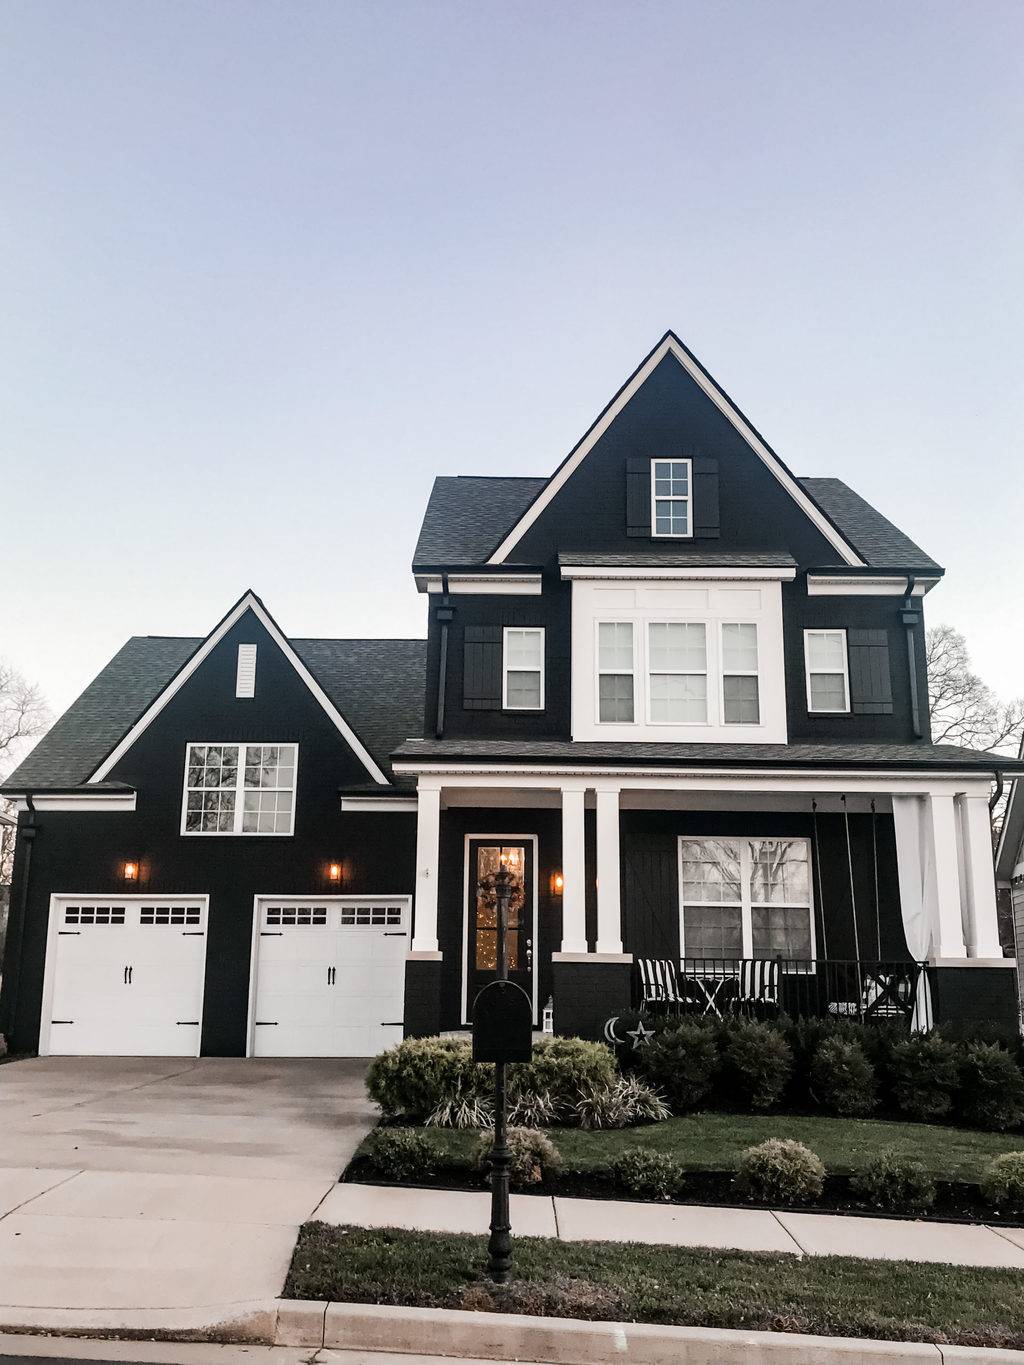 Large black brick house with two white garage doors.